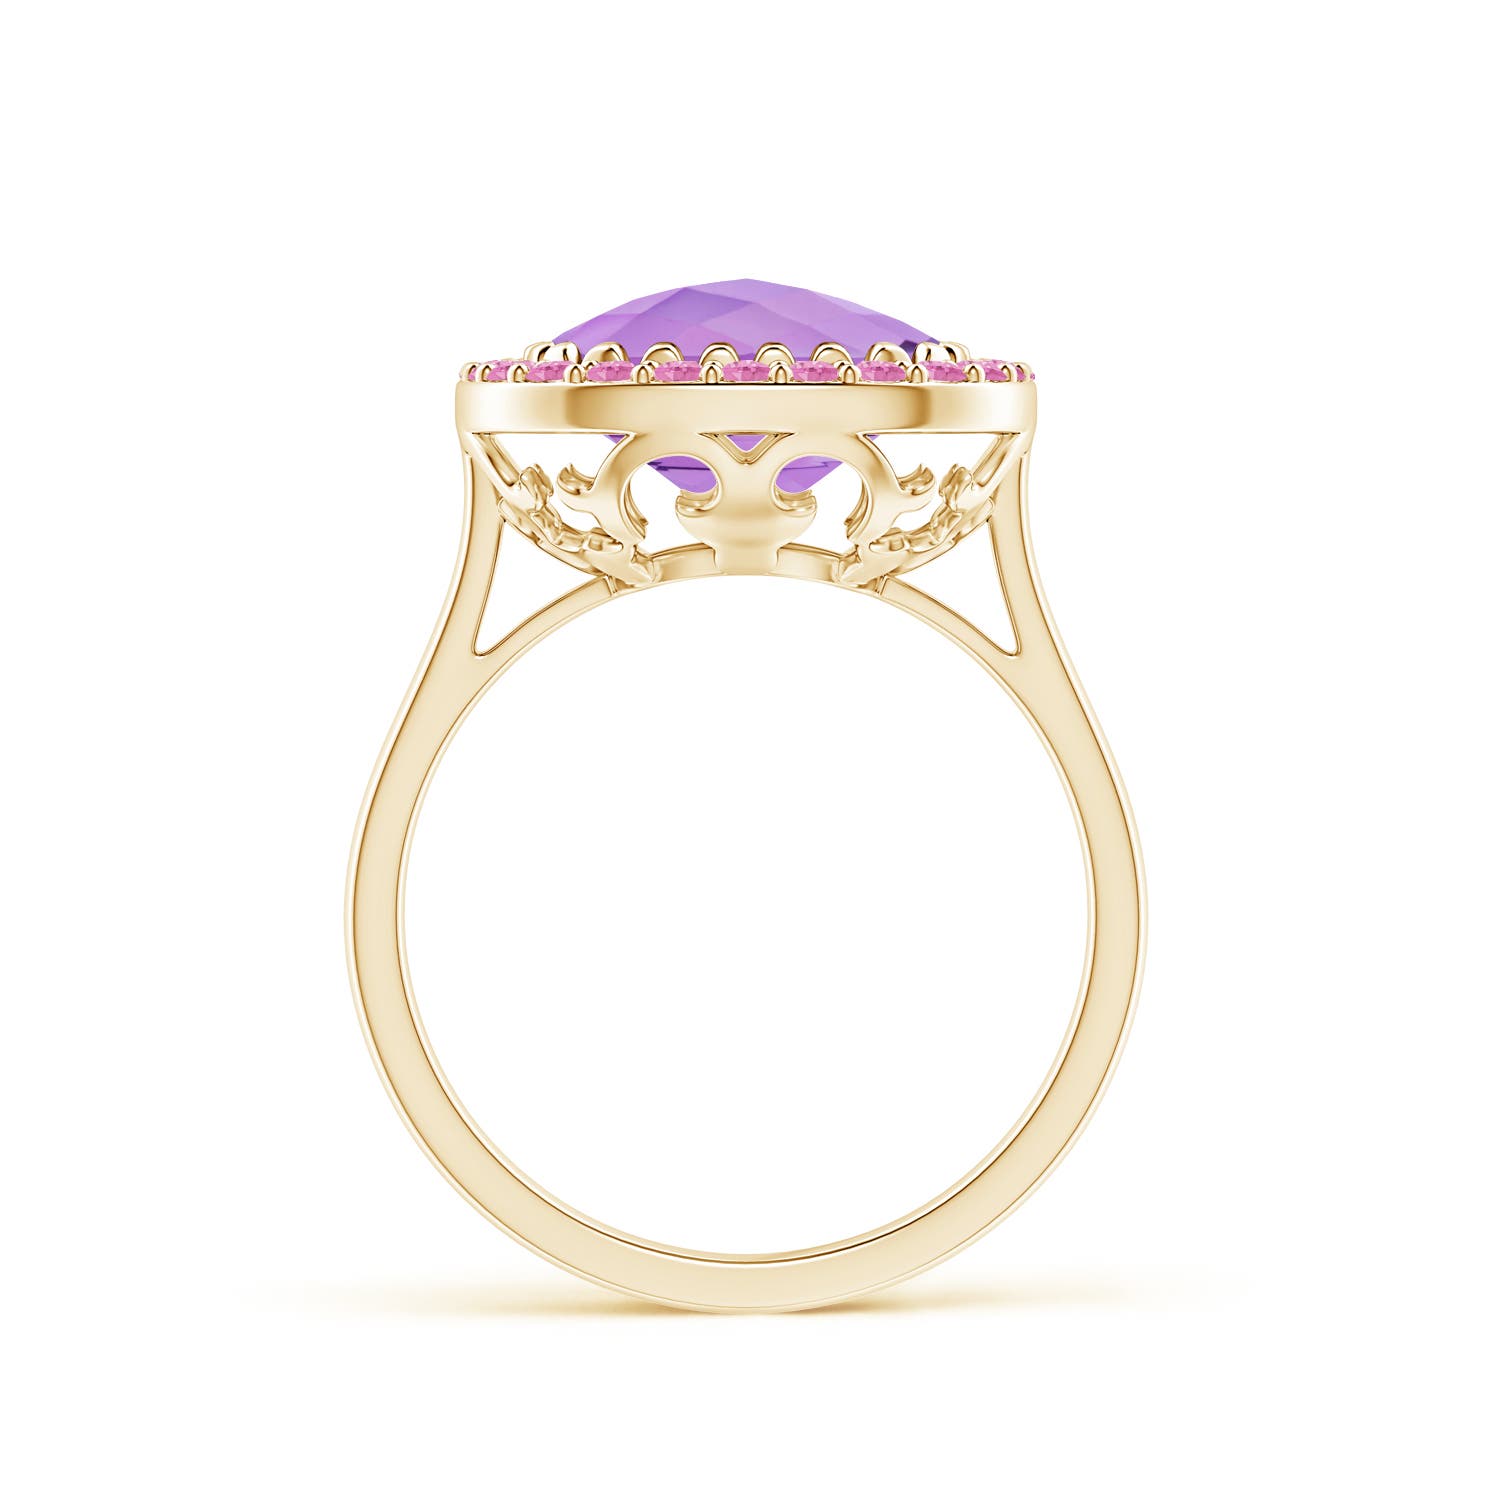 A - Amethyst / 4.65 CT / 14 KT Yellow Gold